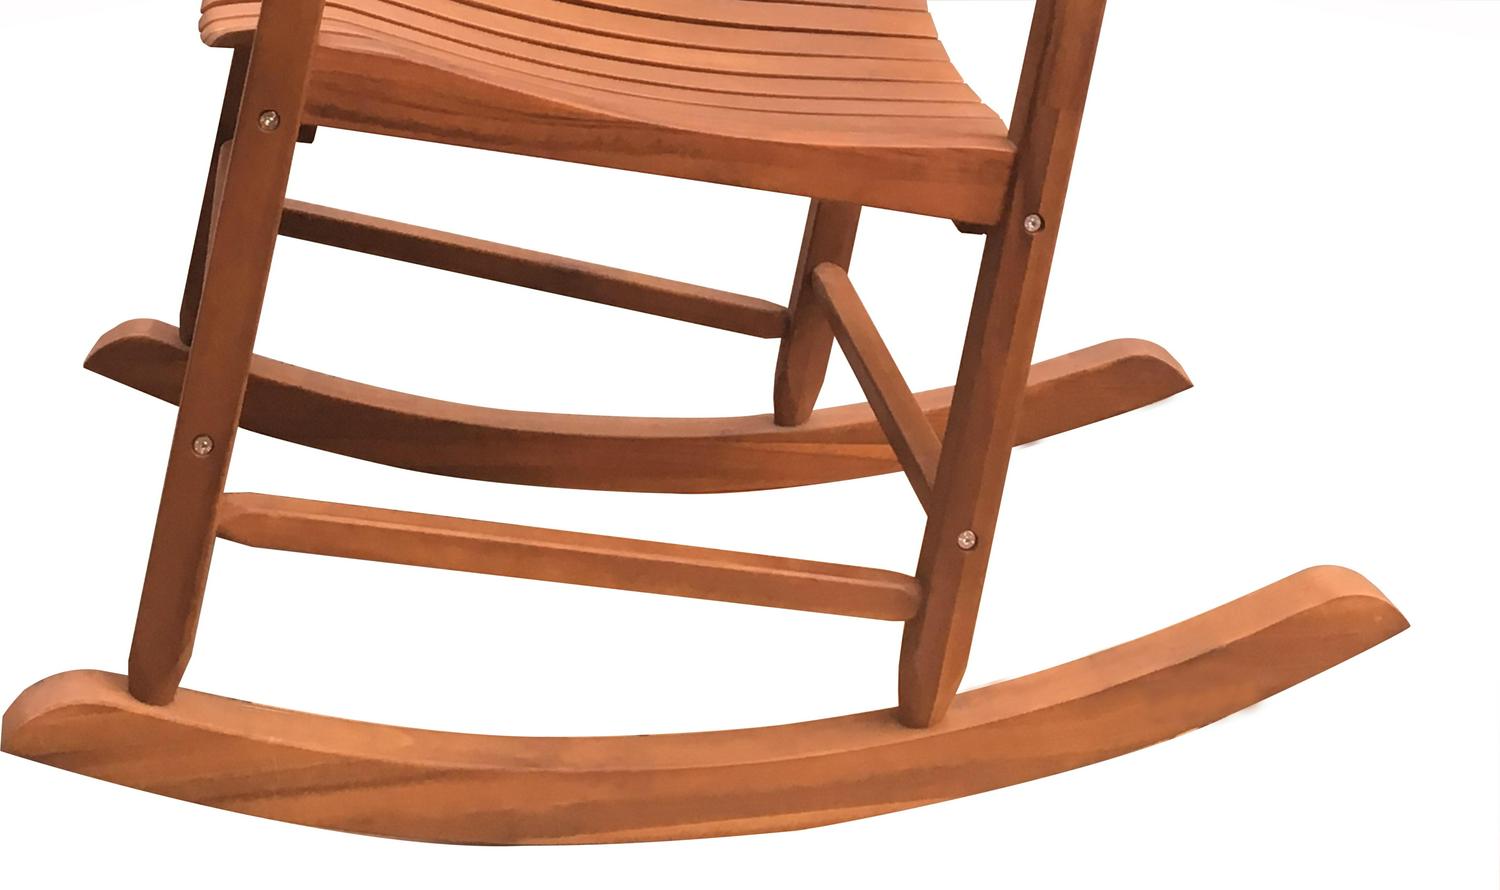 Outdoor Wood Porch Rocking Chair Weather Resistant Support Up To 250 lbs Populaire aanbiedingen